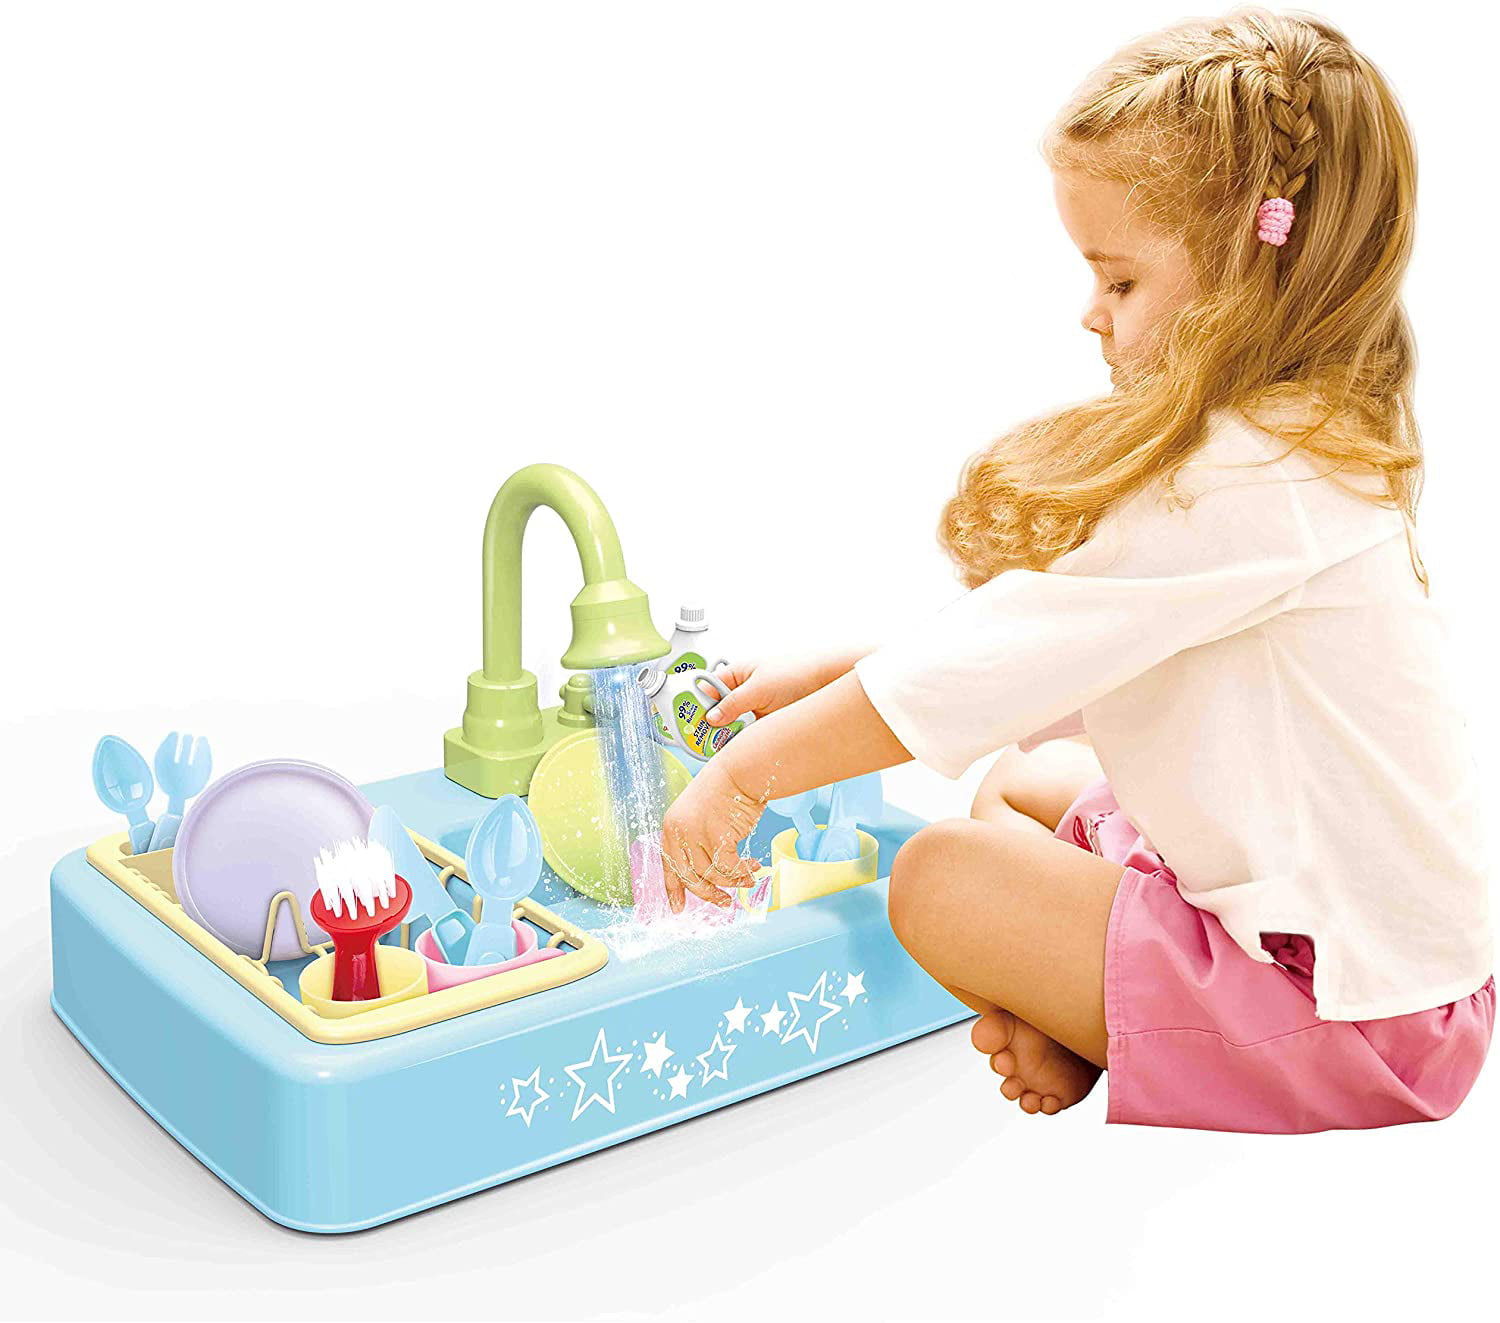 IQ Toys 18 Piece Deluxe Modern Dishes Play Set Pretend Play Wash Up Kitchen Sink with Real Running Water Sink Drain and 16 Accessories Included